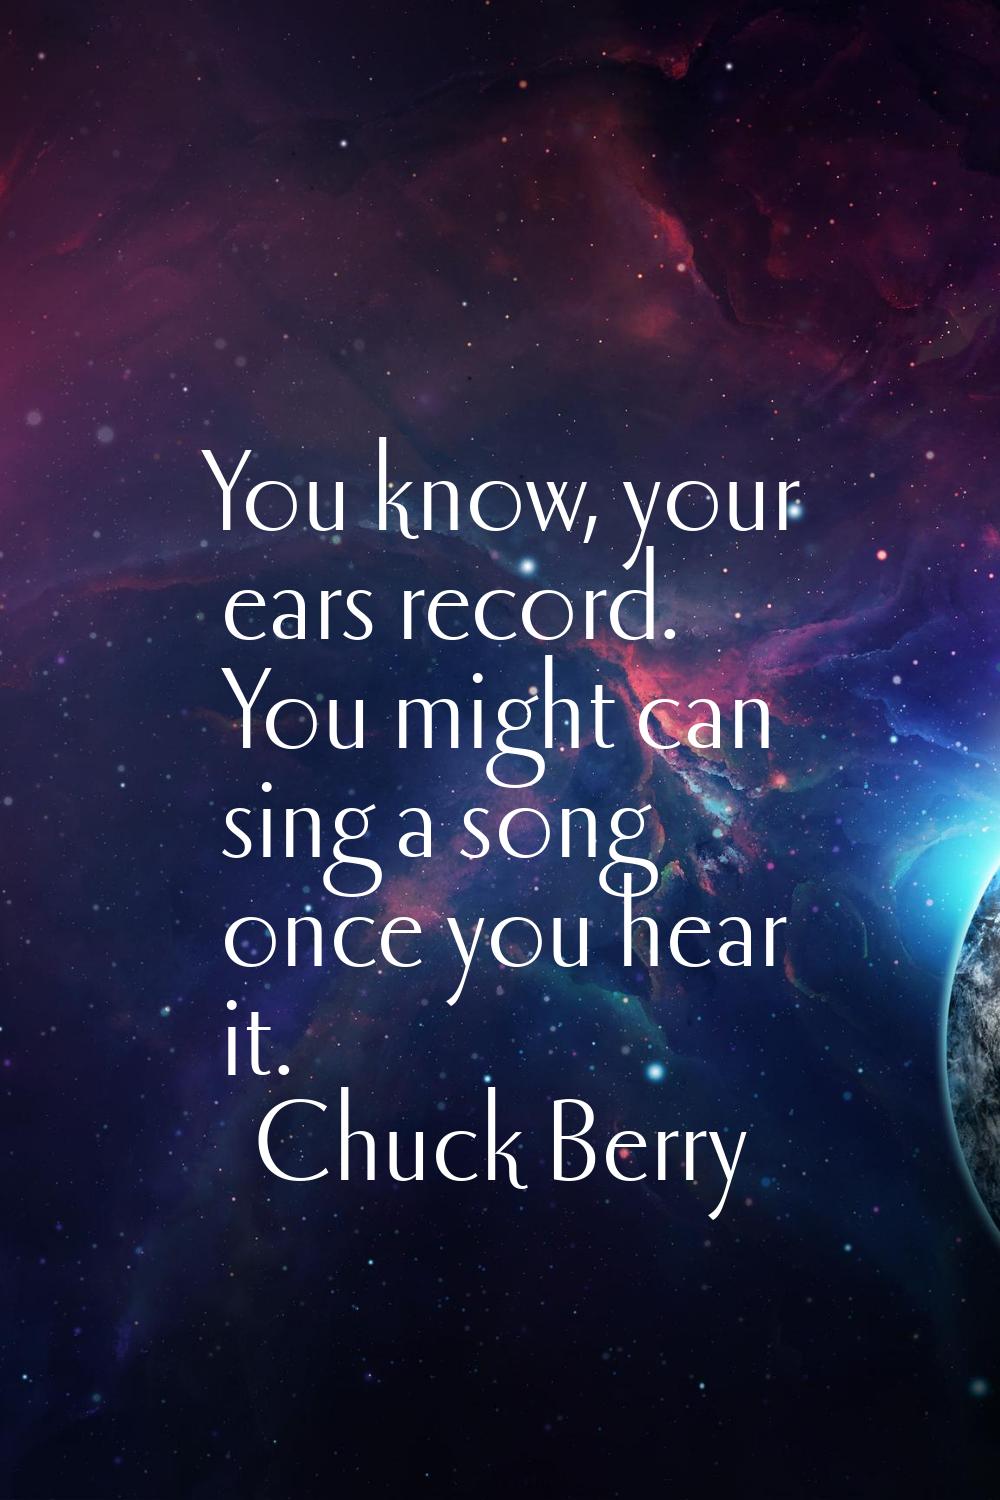 You know, your ears record. You might can sing a song once you hear it.